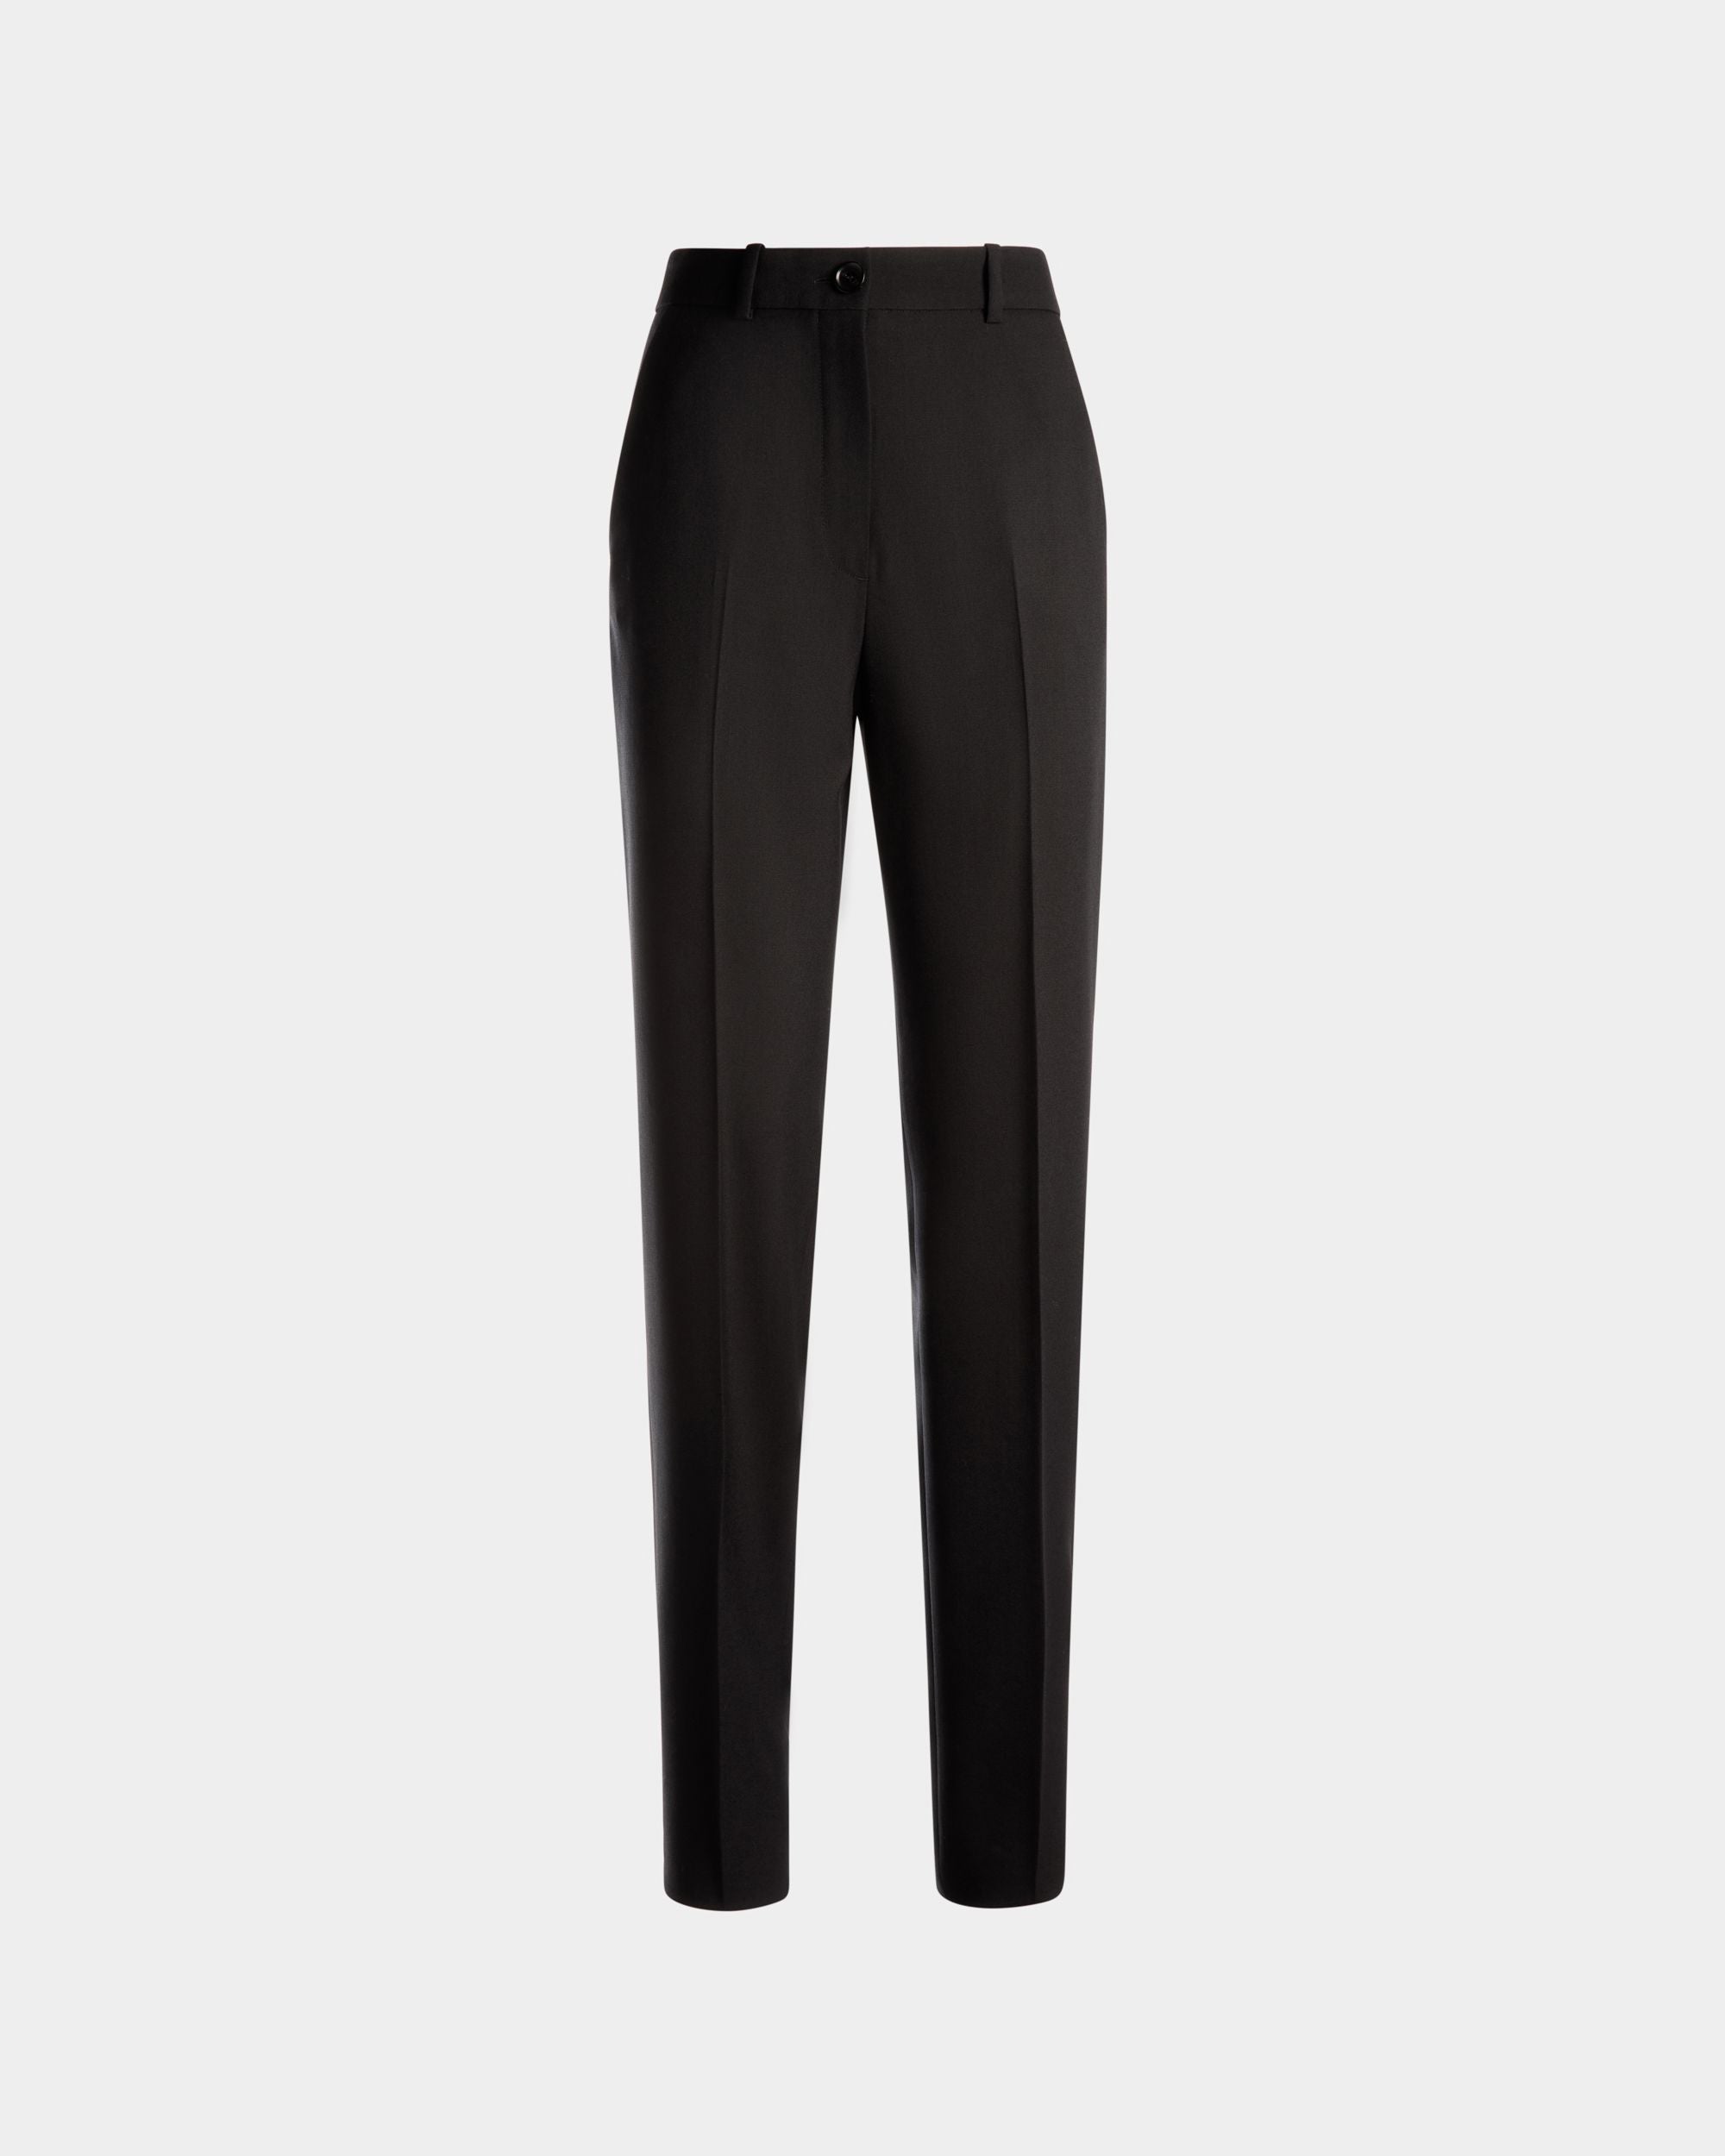 Women's Straight Fit Pants in Black Wool | Bally | Still Life Front